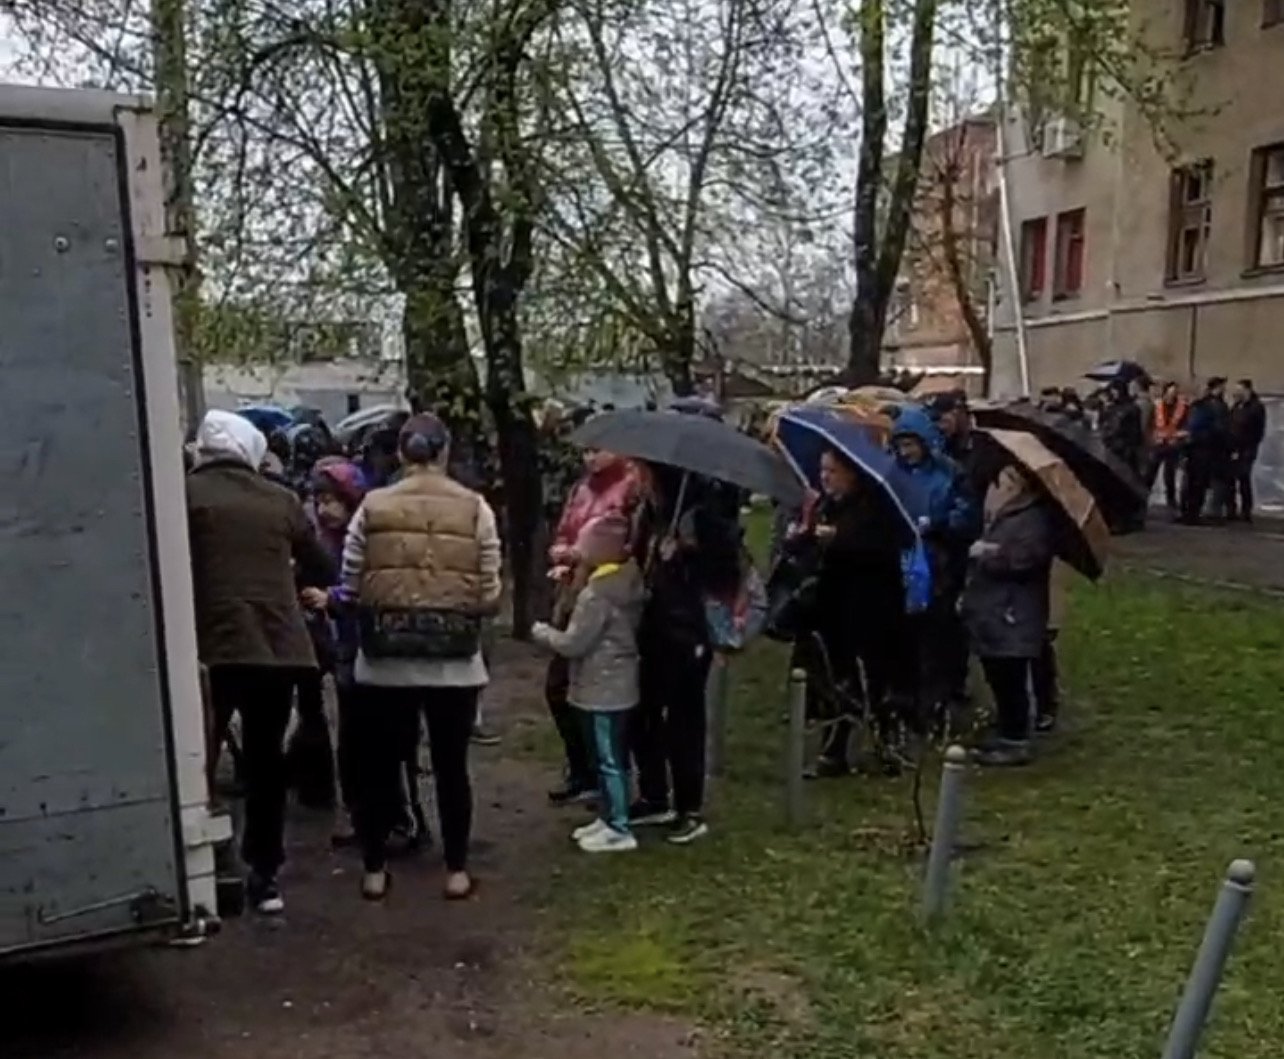 People qued for hours waiting for 1 bag of food - enough to feed family of 4 for 2 days